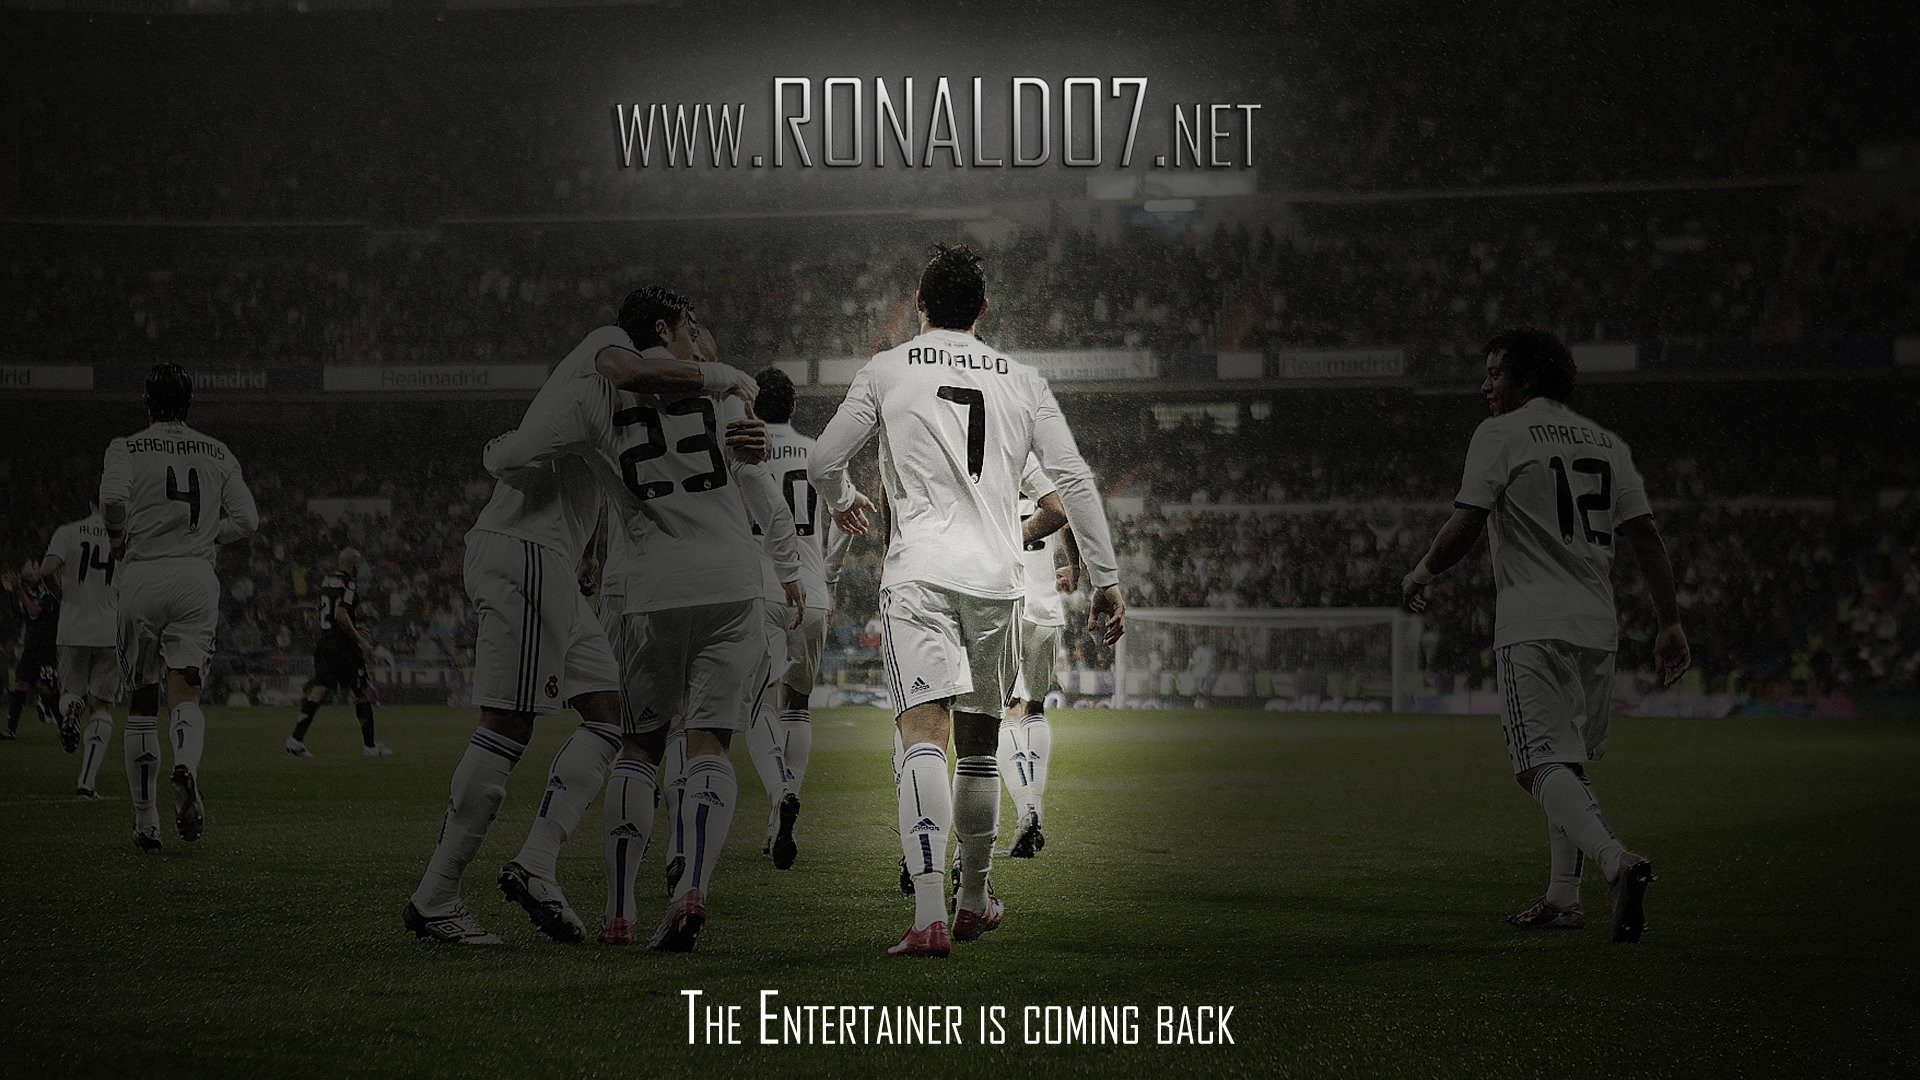 Cristiano Ronaldo wallpaper in Full HD (1920×1080): The entertainer is  coming back